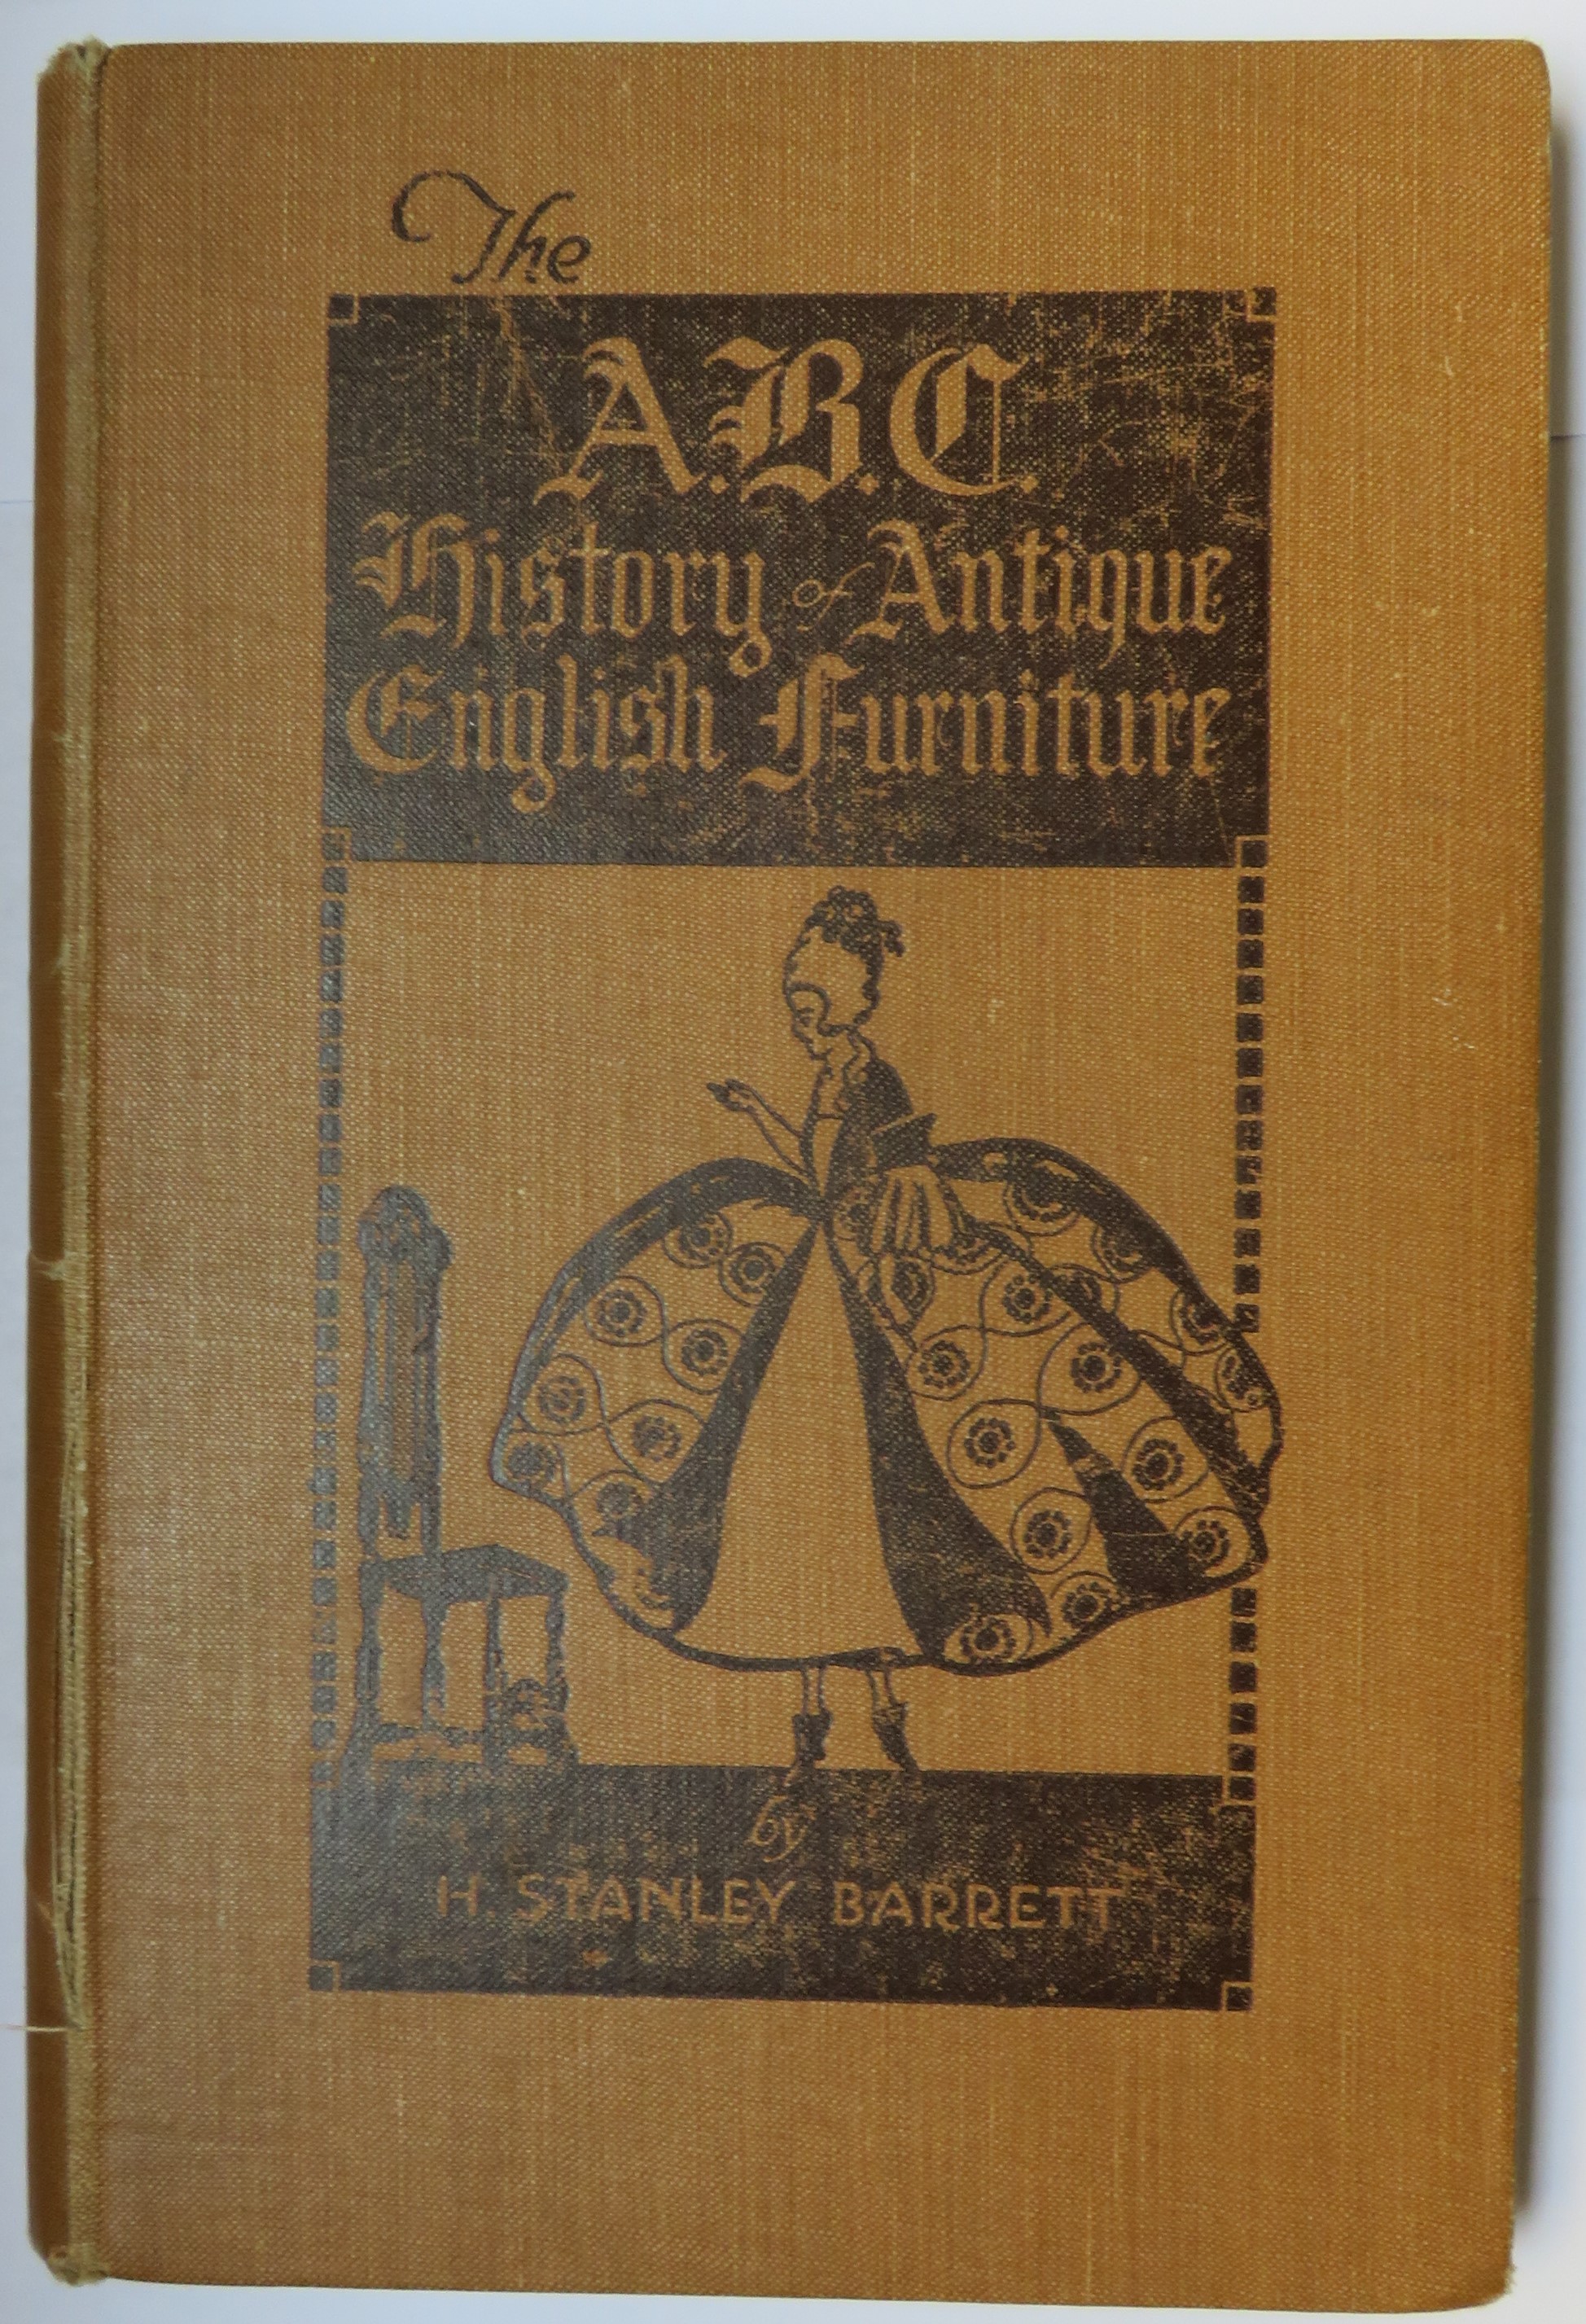 The ABC History of Antique English Furniture